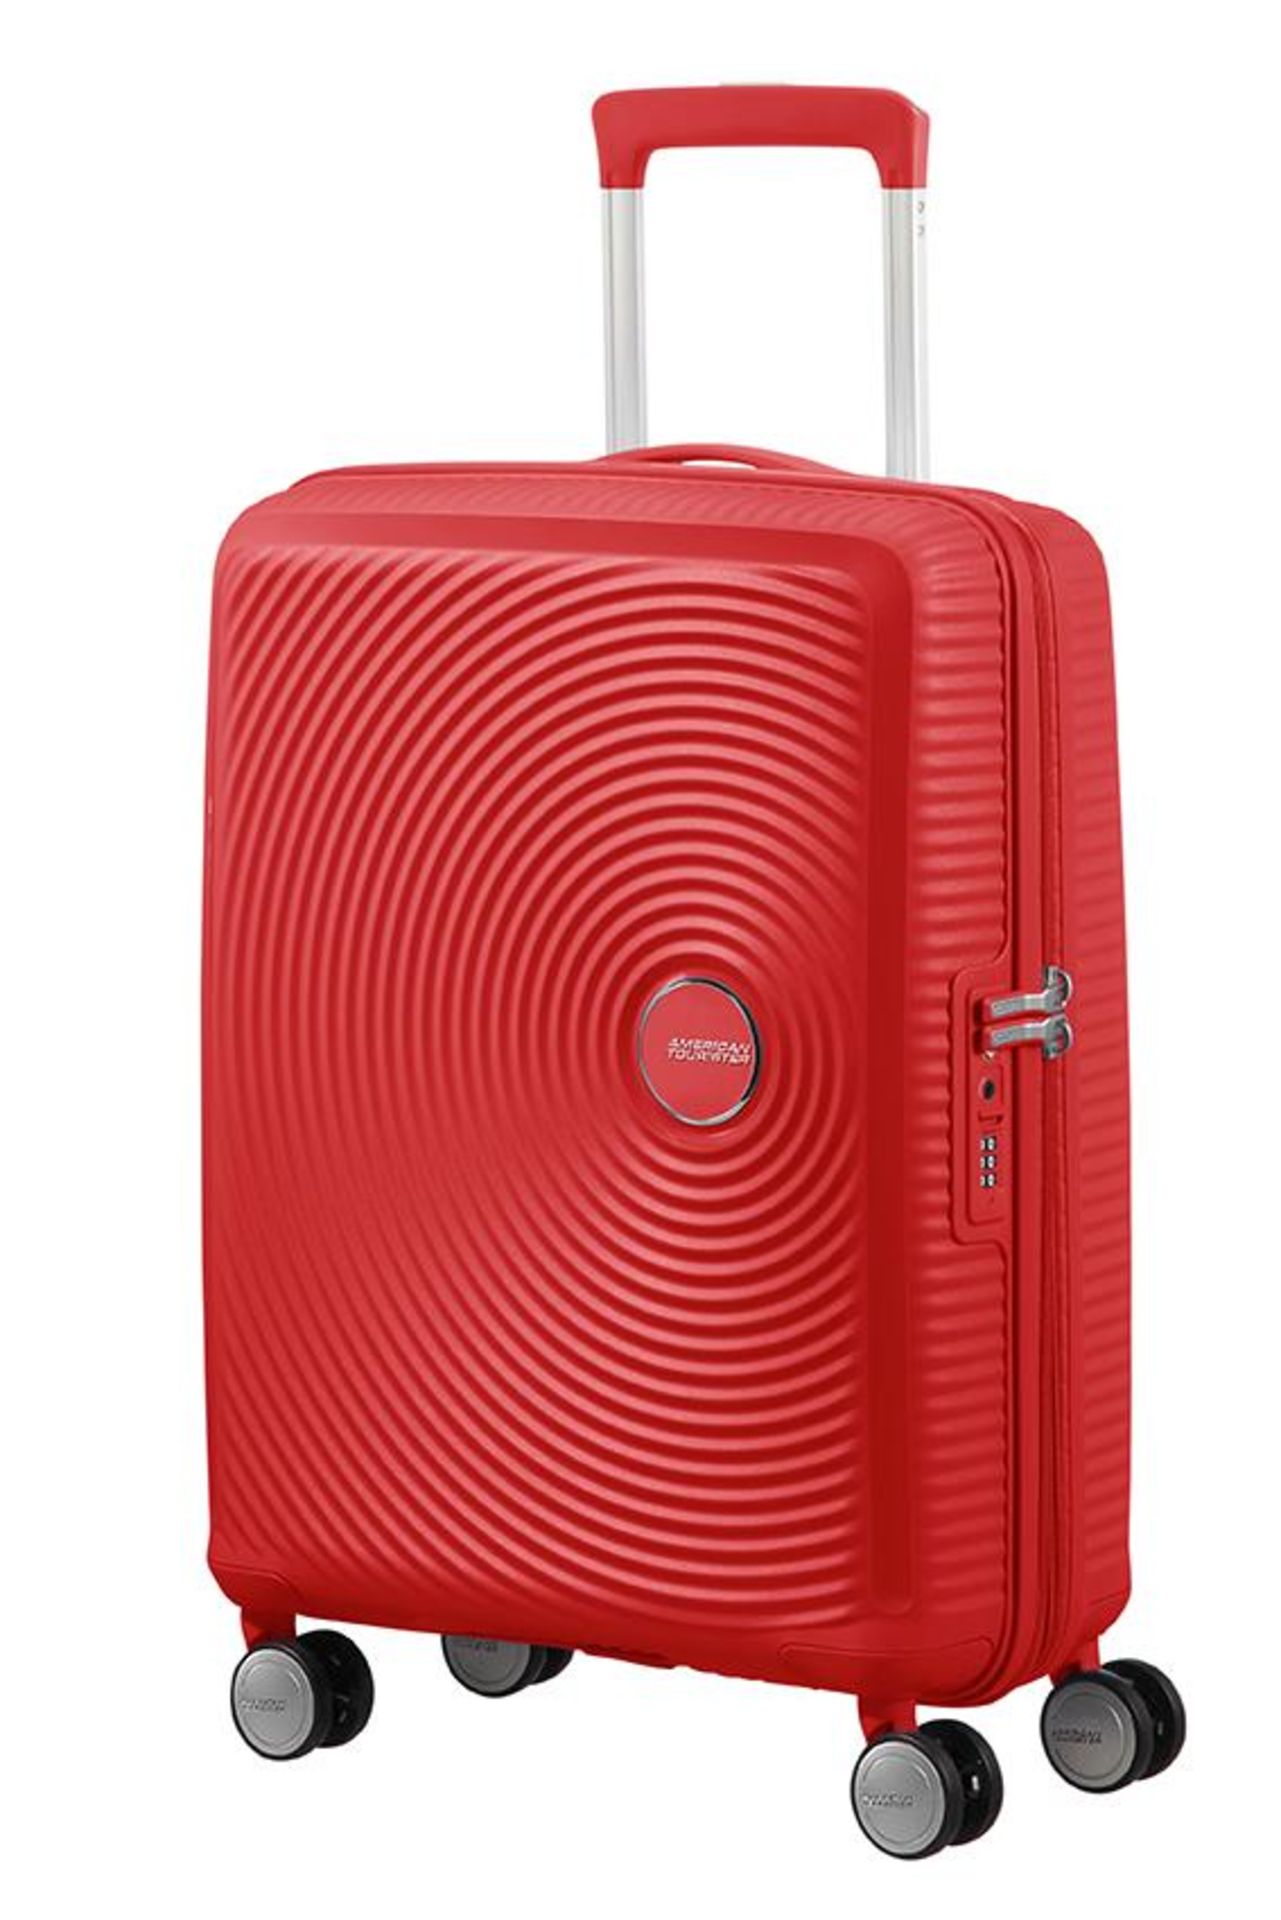 BRAND NEW AMERICAN TOURISTER SOUNDBOX SPINNER 67 LUGGAGE BAG CORAL RED RRP £199